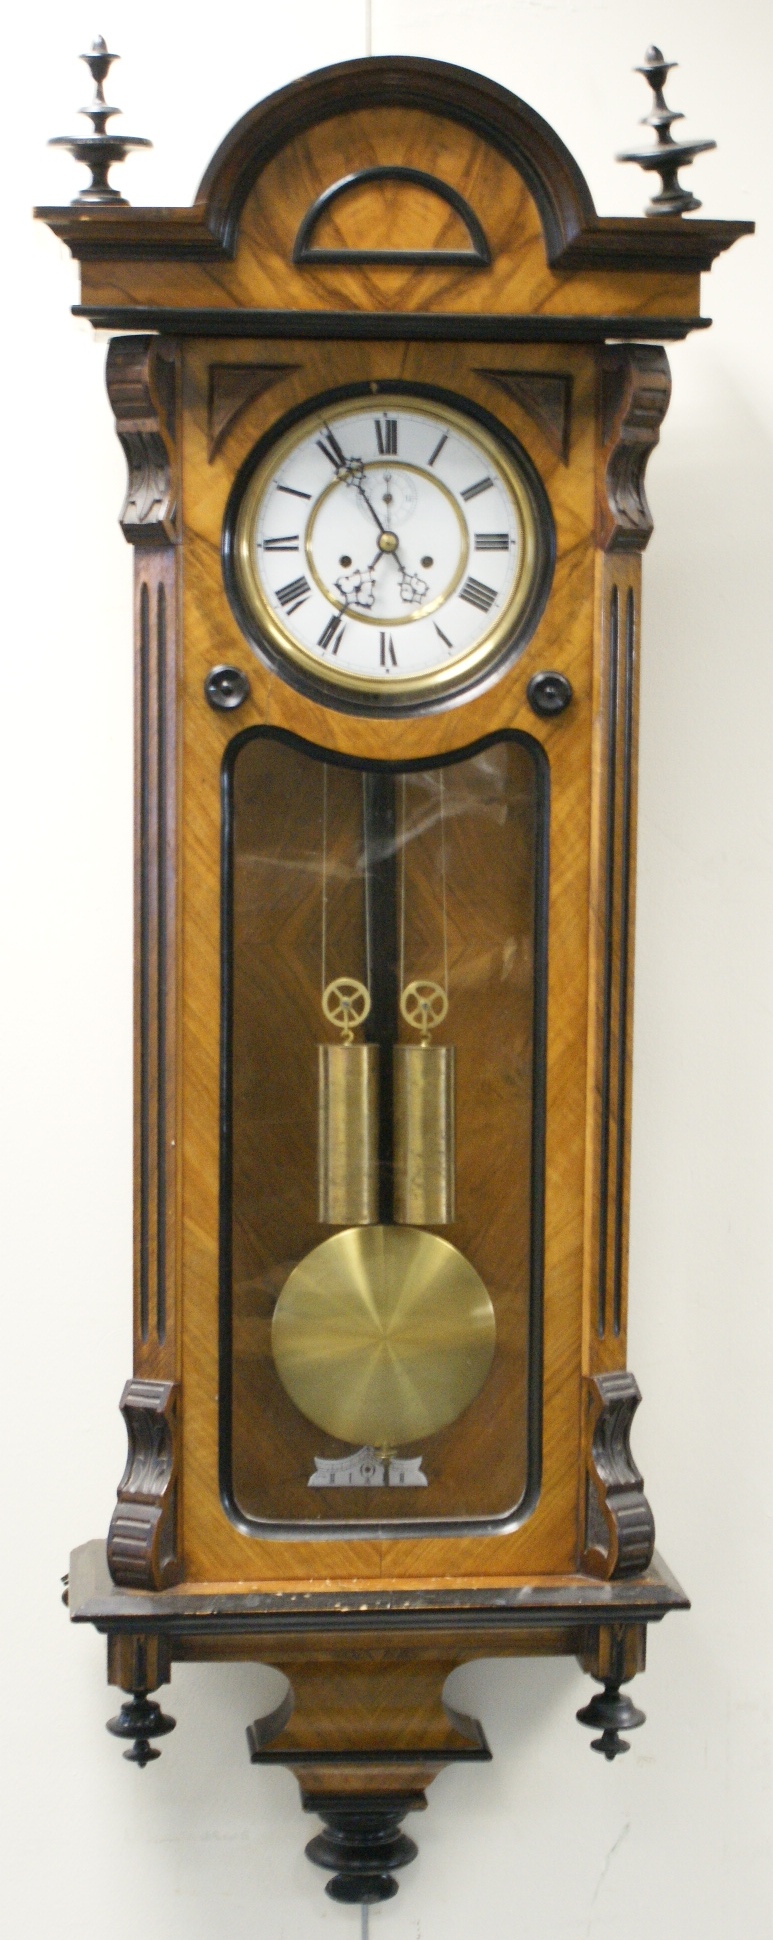 Victorian walnut and ebonised Vienna regulator wall clock, circa 1890, with turned finials over an